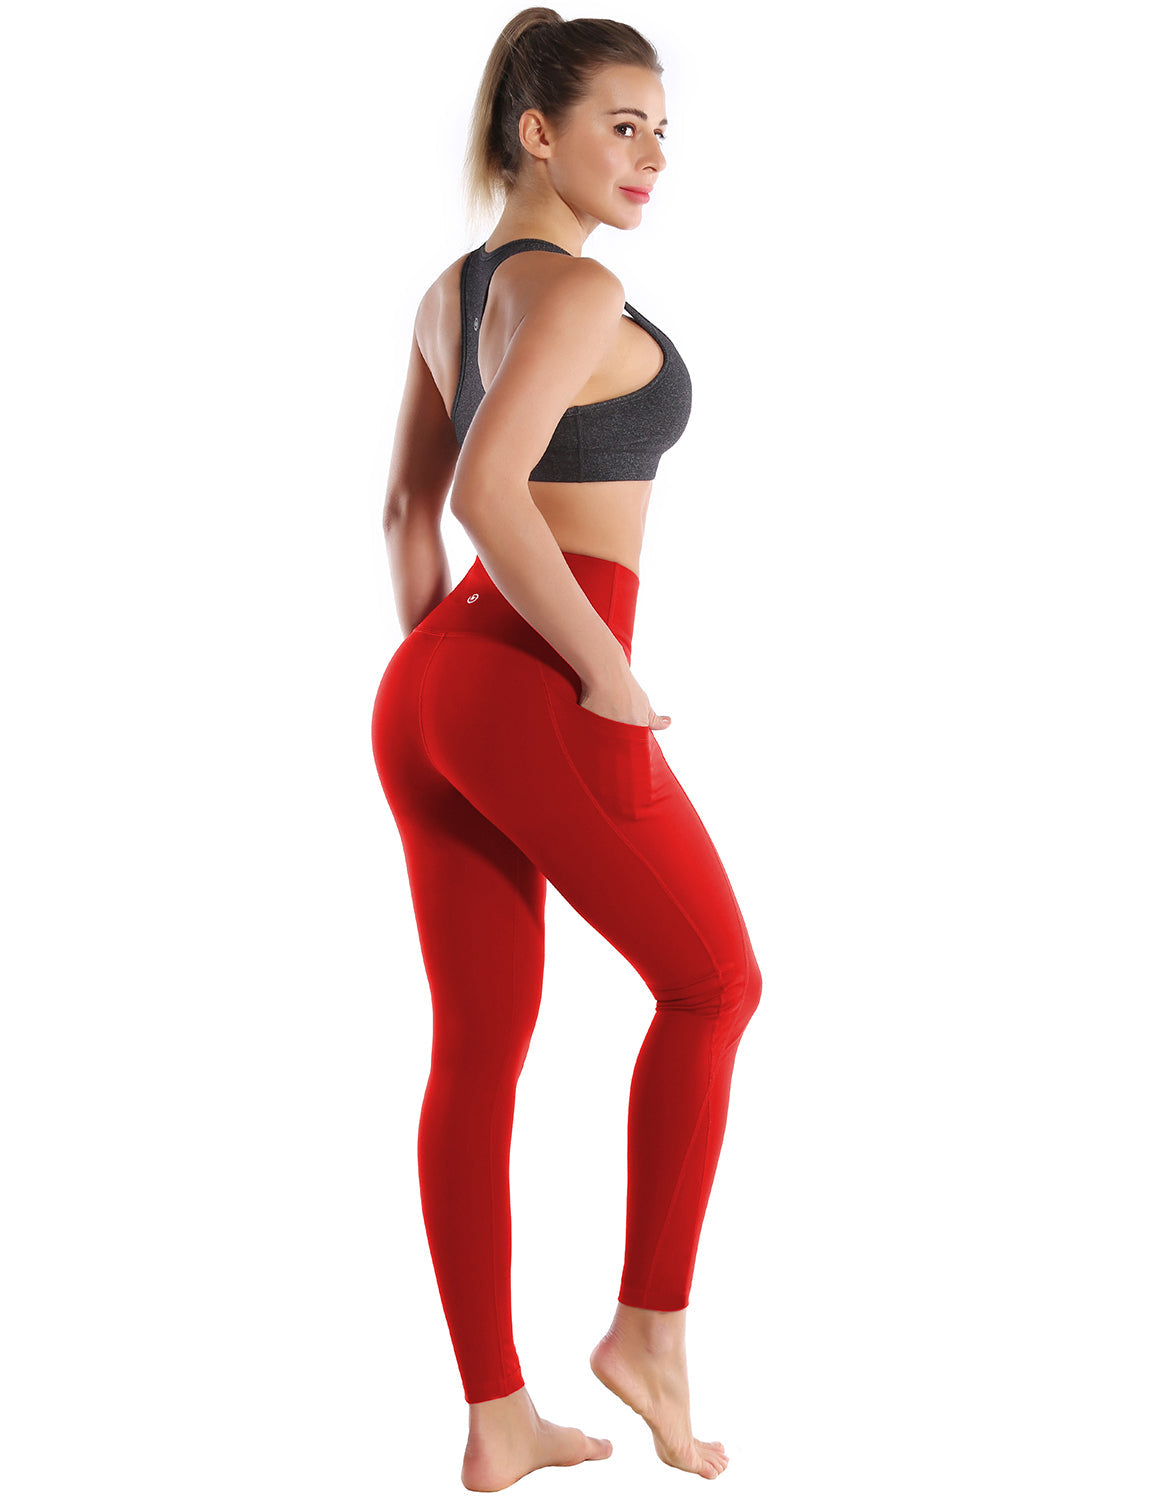 High Waist Side Pockets Pilates Pants scarlet 75% Nylon, 25% Spandex Fabric doesn't attract lint easily 4-way stretch No see-through Moisture-wicking Tummy control Inner pocket